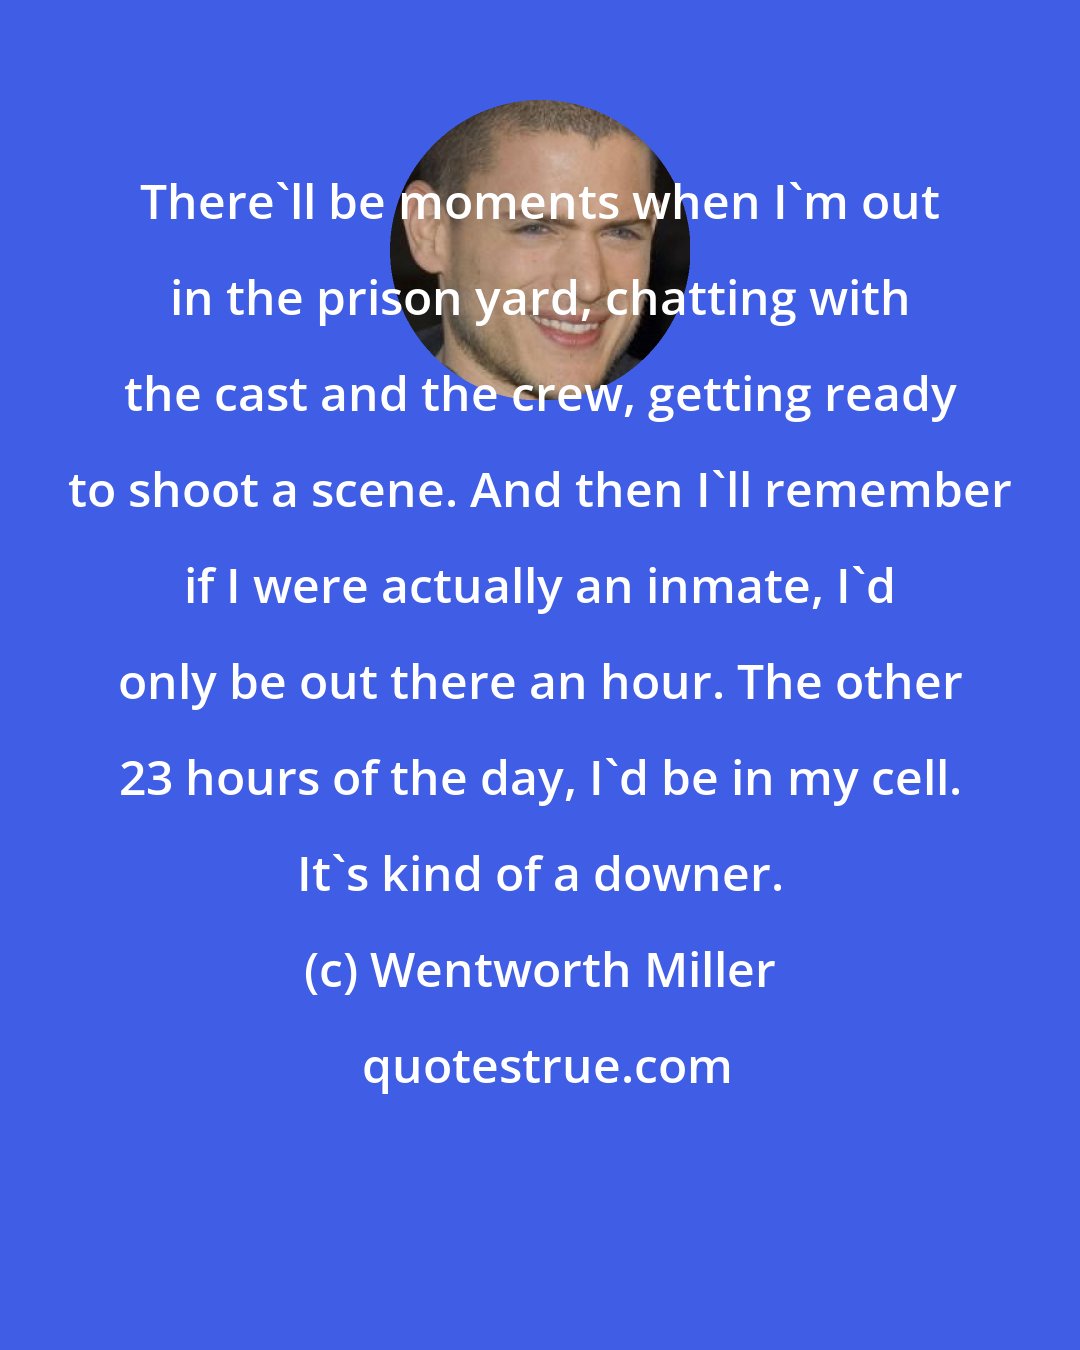 Wentworth Miller: There'll be moments when I'm out in the prison yard, chatting with the cast and the crew, getting ready to shoot a scene. And then I'll remember if I were actually an inmate, I'd only be out there an hour. The other 23 hours of the day, I'd be in my cell. It's kind of a downer.